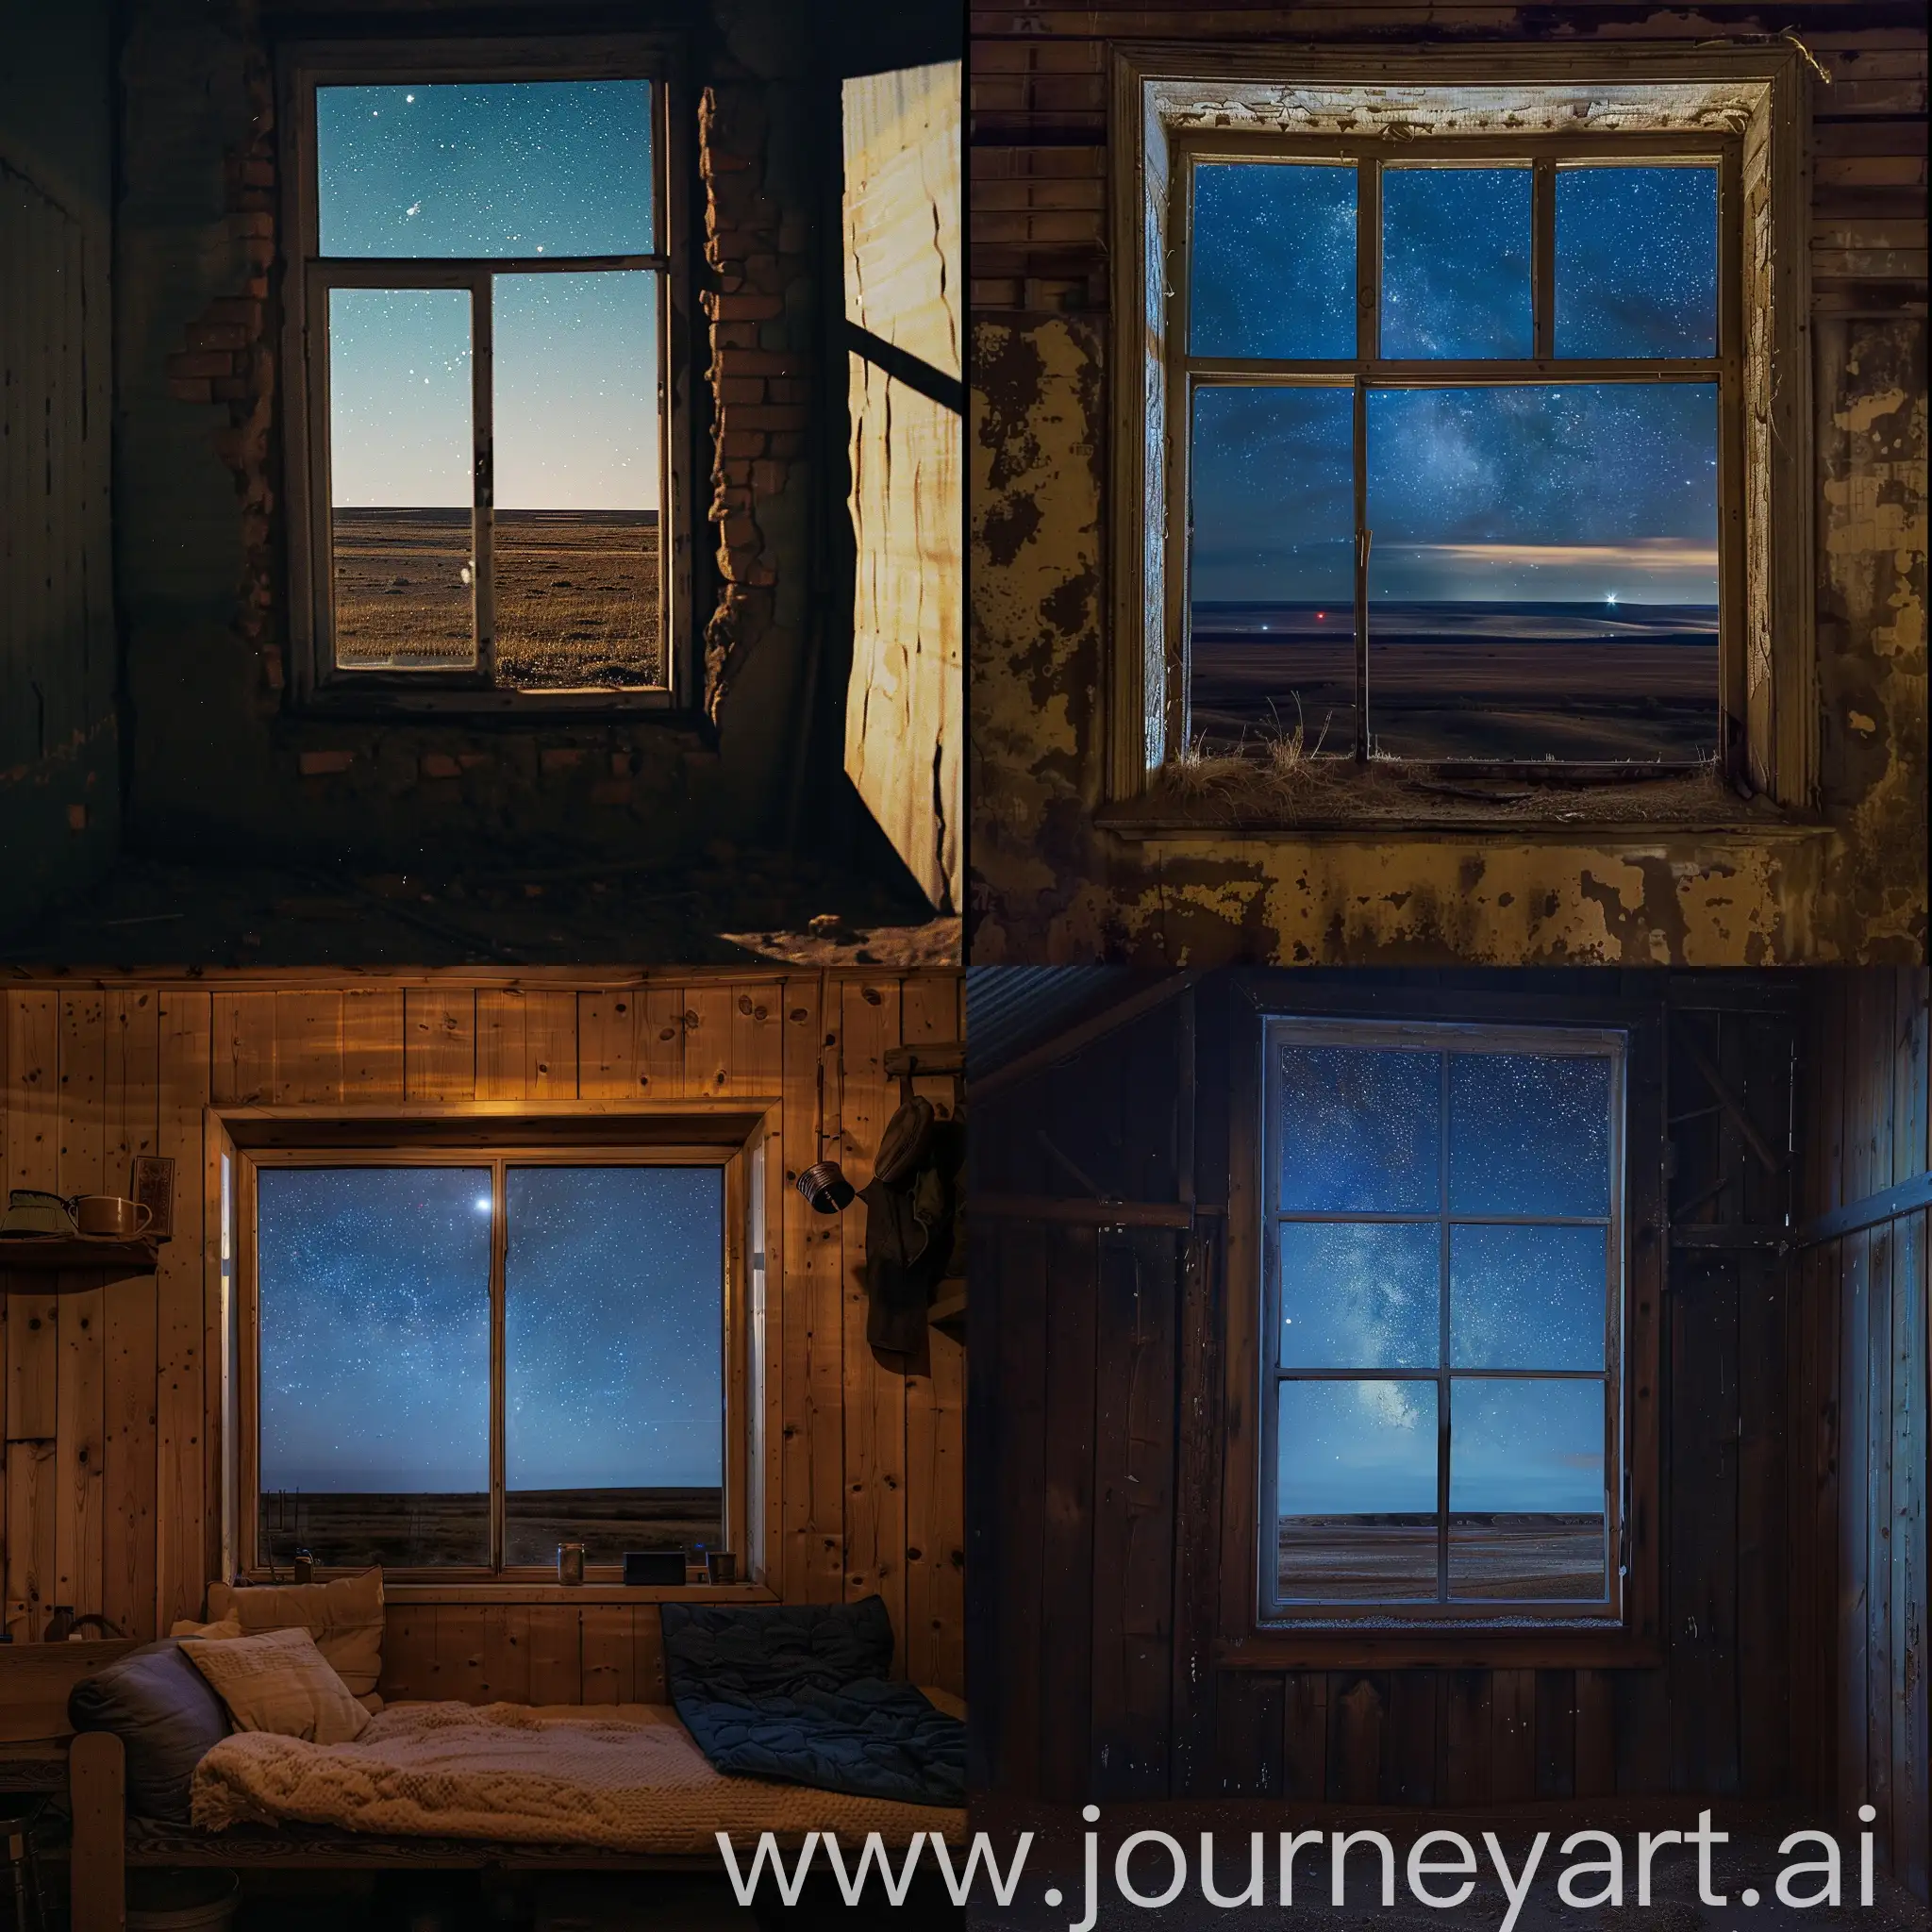 Lonely-Window-Facing-the-Night-Steppe